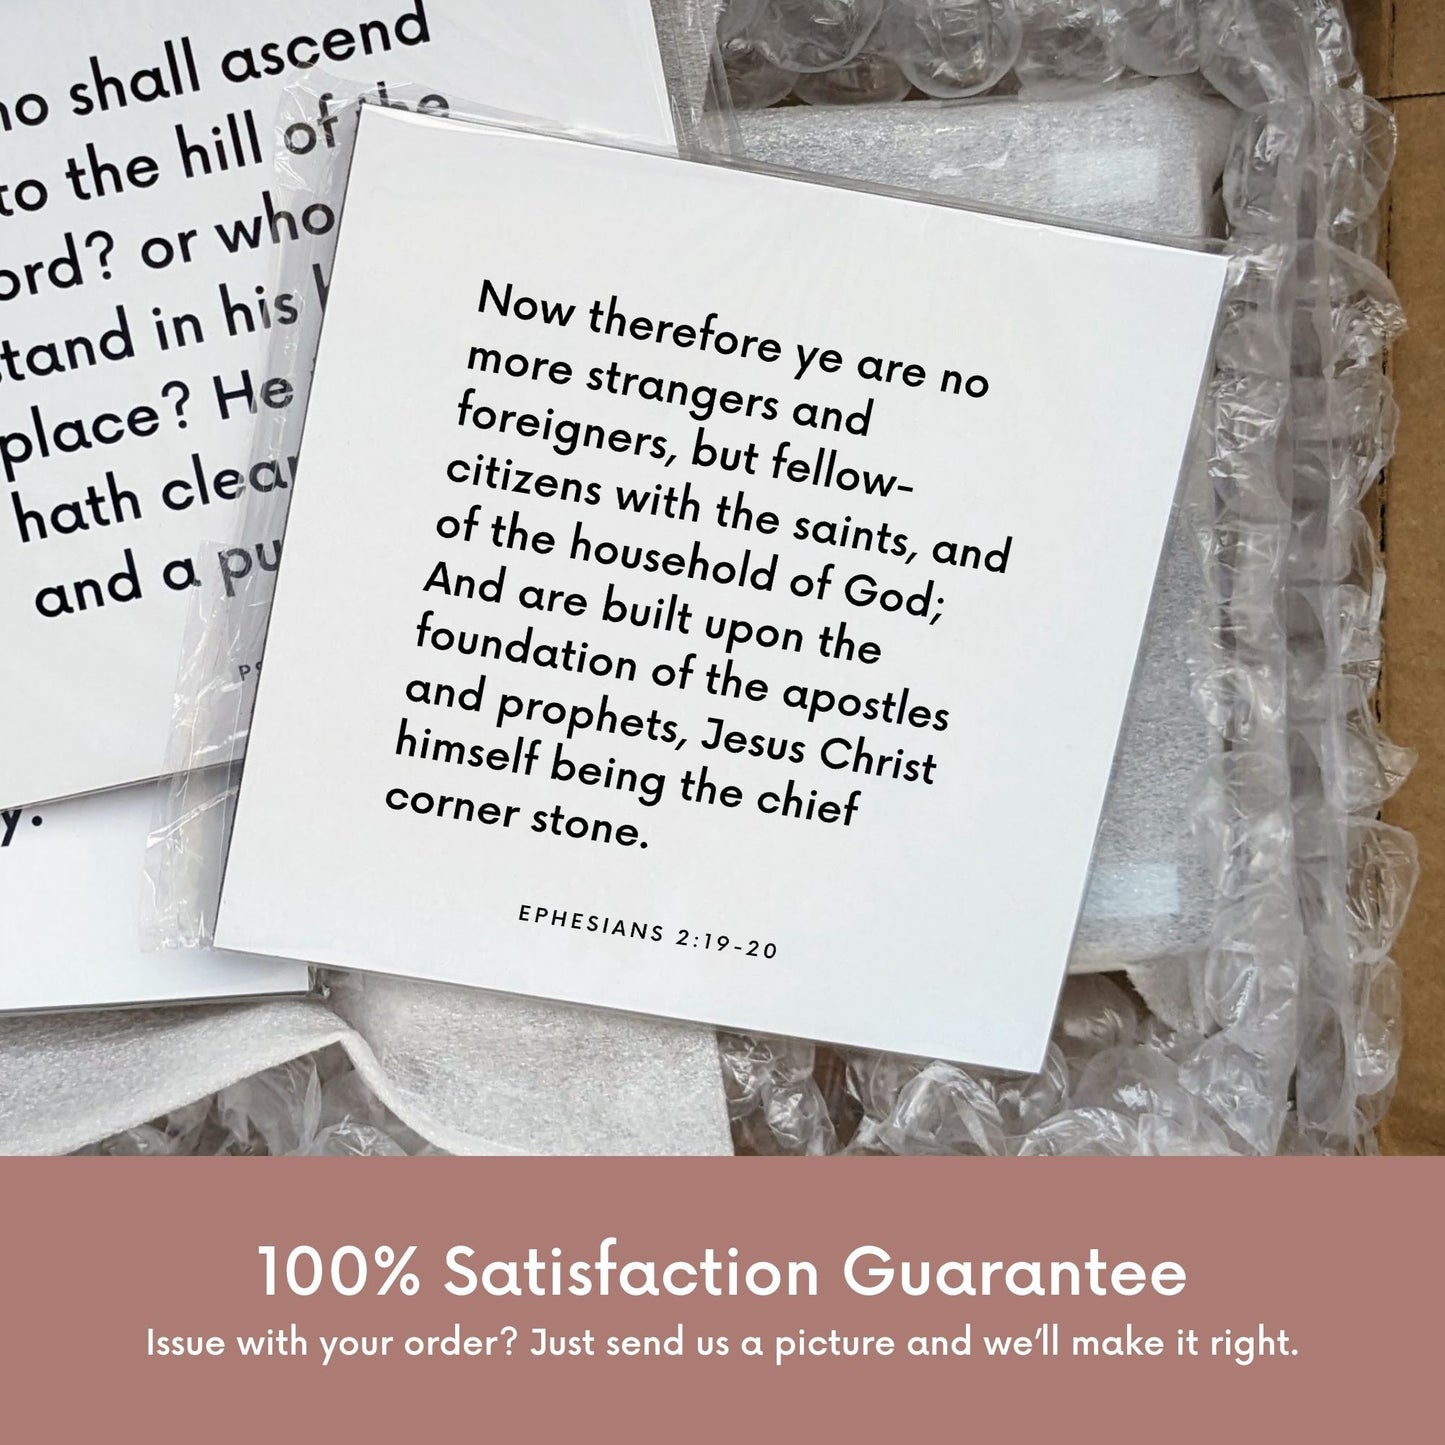 Shipping materials for scripture tile of Ephesians 2:19-20 - "Ye are no more strangers or foreigners, but fellowcitizens"